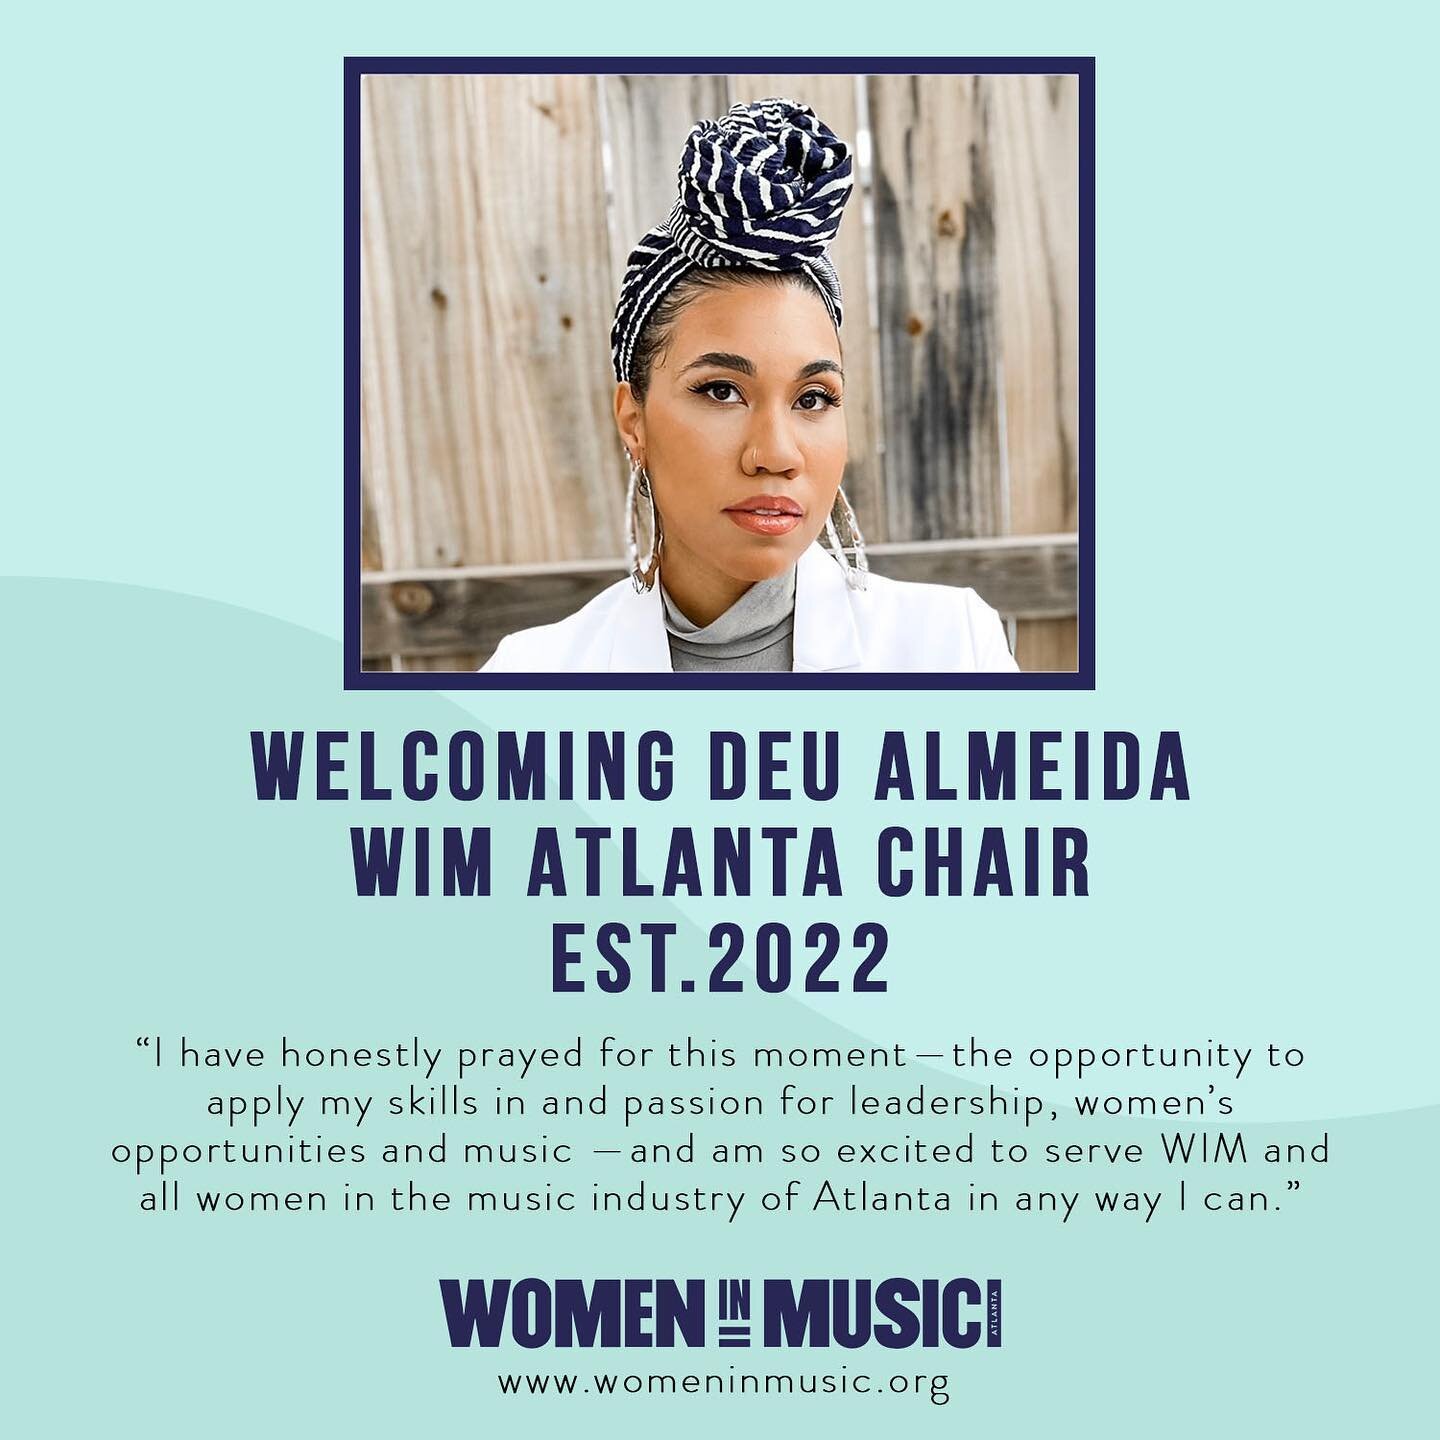 🎼 A little over four years ago, I put the call out about wanting to start a Chapter of Women in Music in Atlanta.
.
A few weeks later, six women met me at a restaurant to learn more, and we officially launched WIM Atlanta. 
.
@womeninmusic at its co